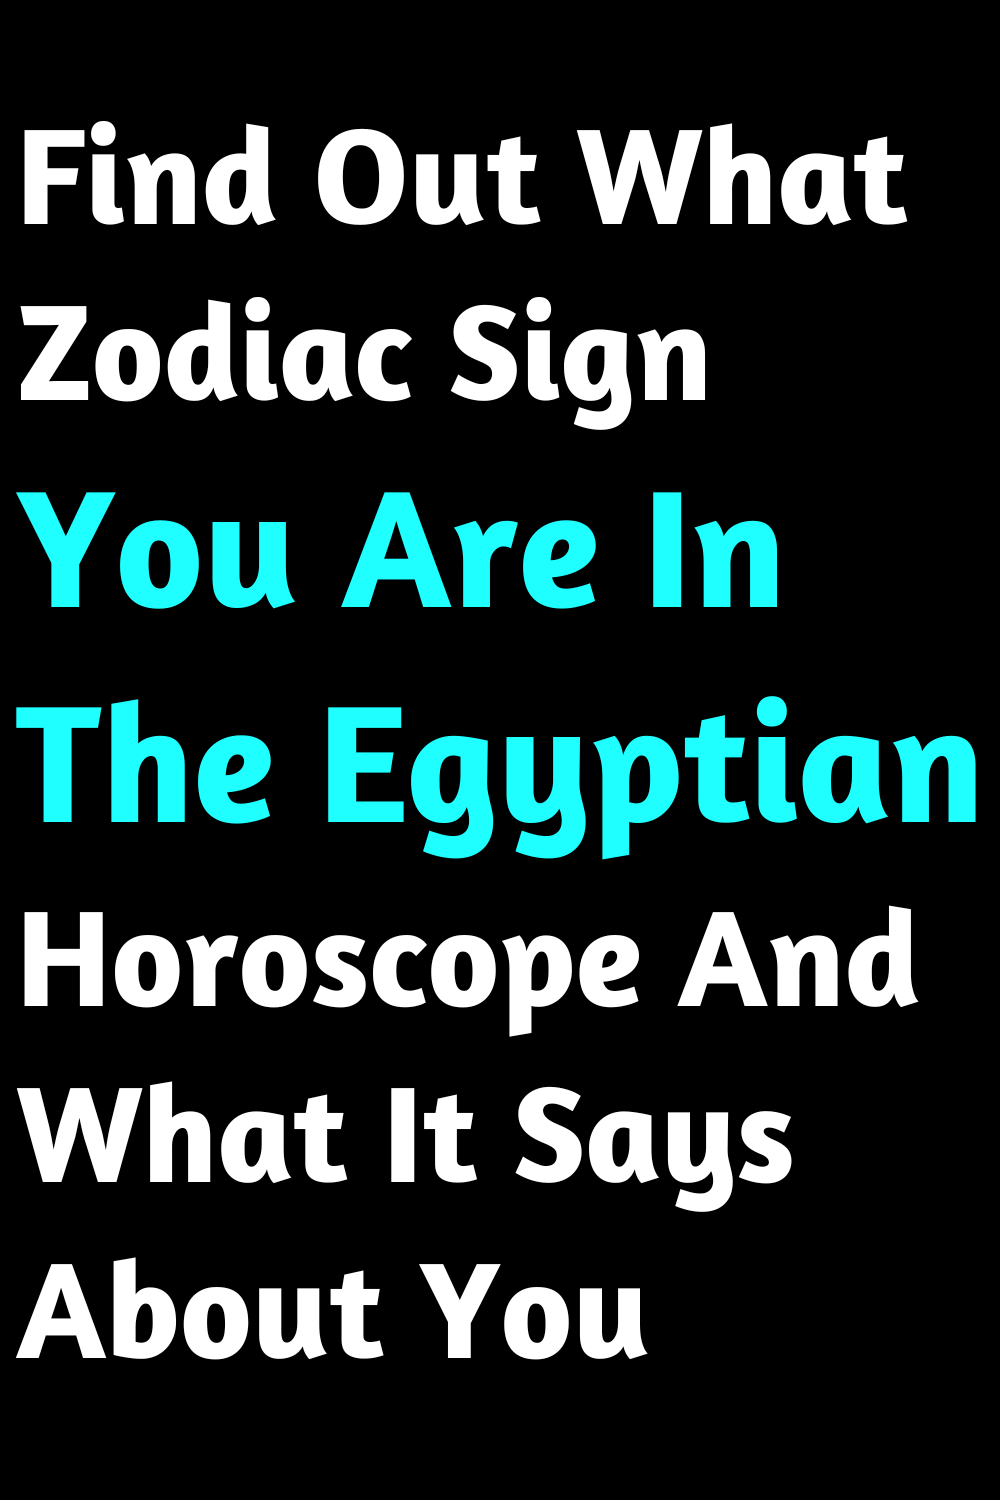 Find Out What Zodiac Sign You Are In The Egyptian Horoscope And What It Says About You